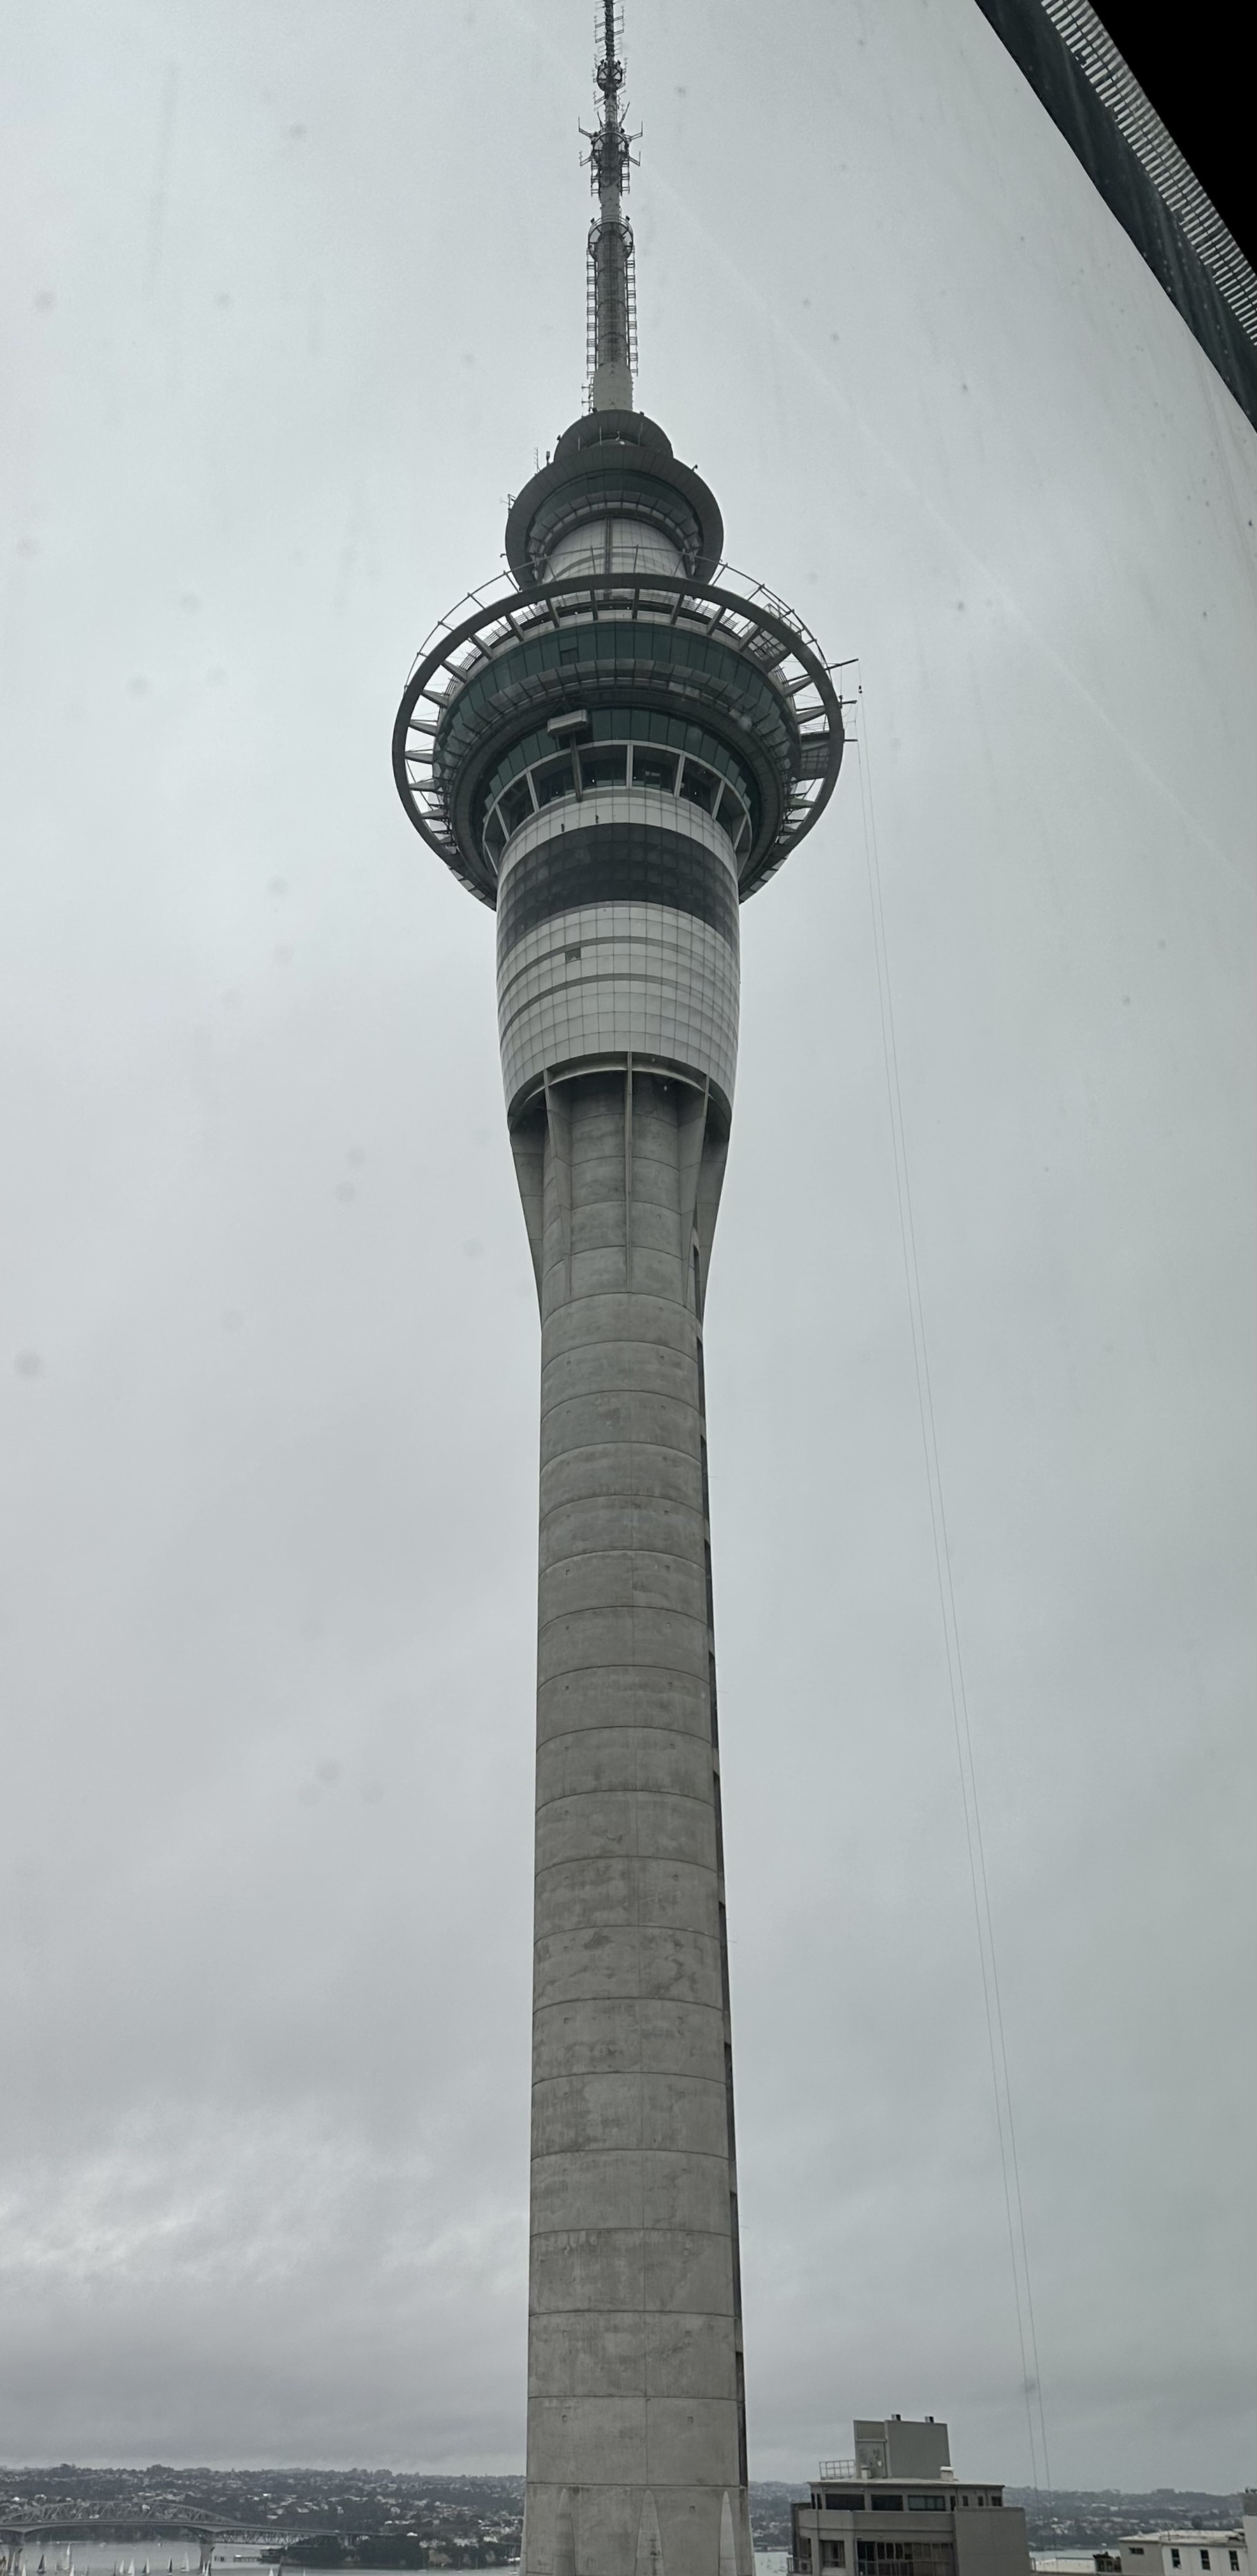 Grey, wintery photo of the Sky Tower in Auckland